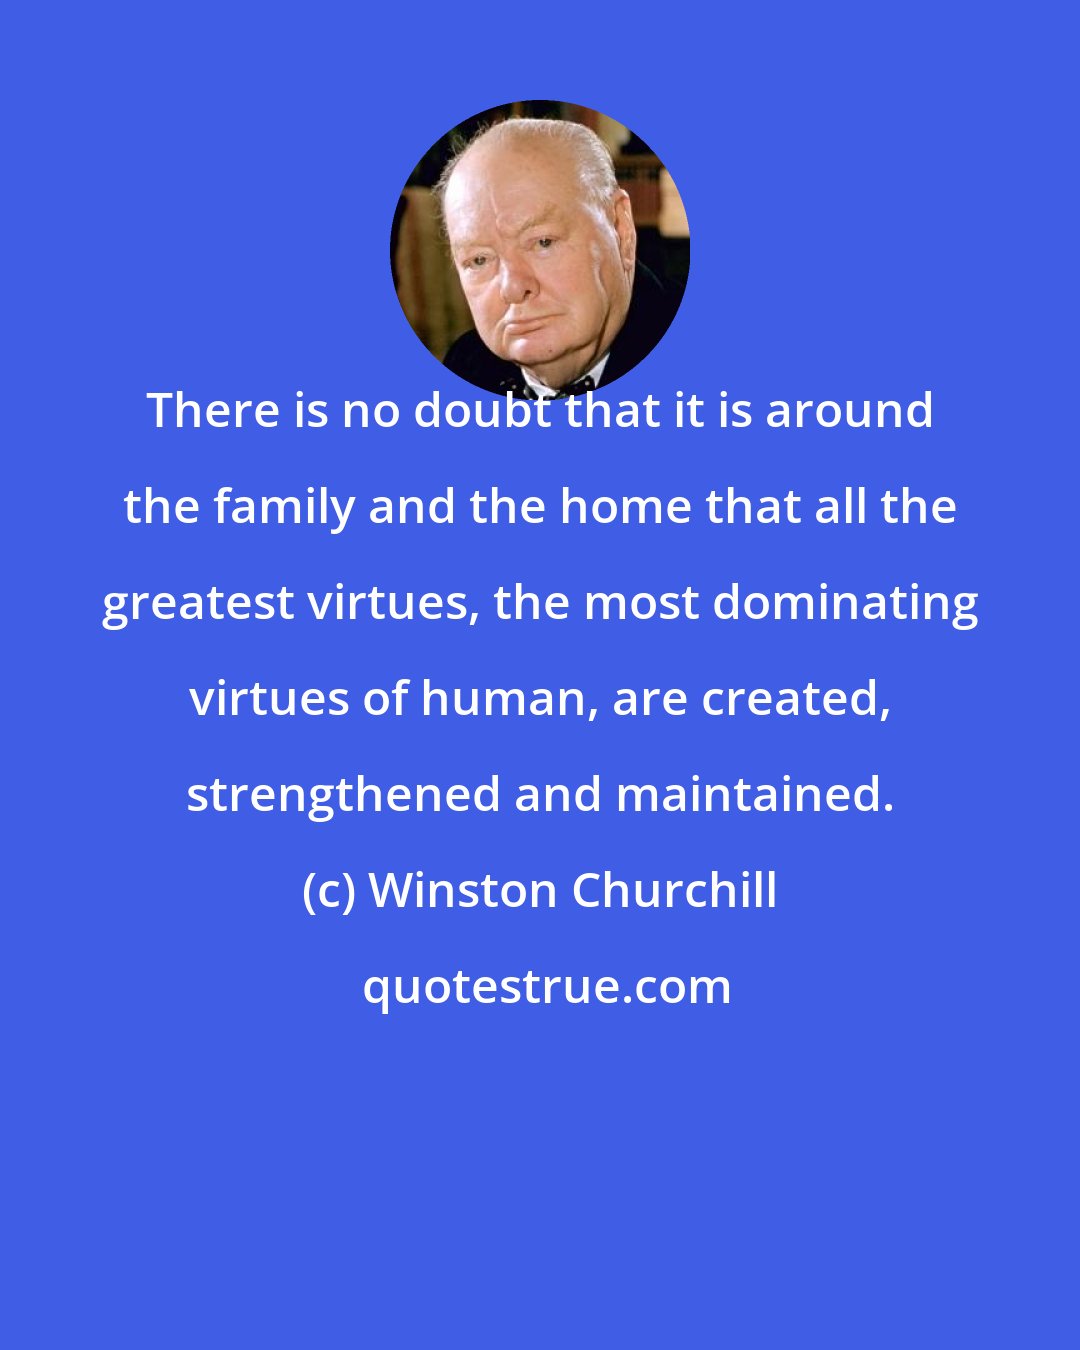 Winston Churchill: There is no doubt that it is around the family and the home that all the greatest virtues, the most dominating virtues of human, are created, strengthened and maintained.